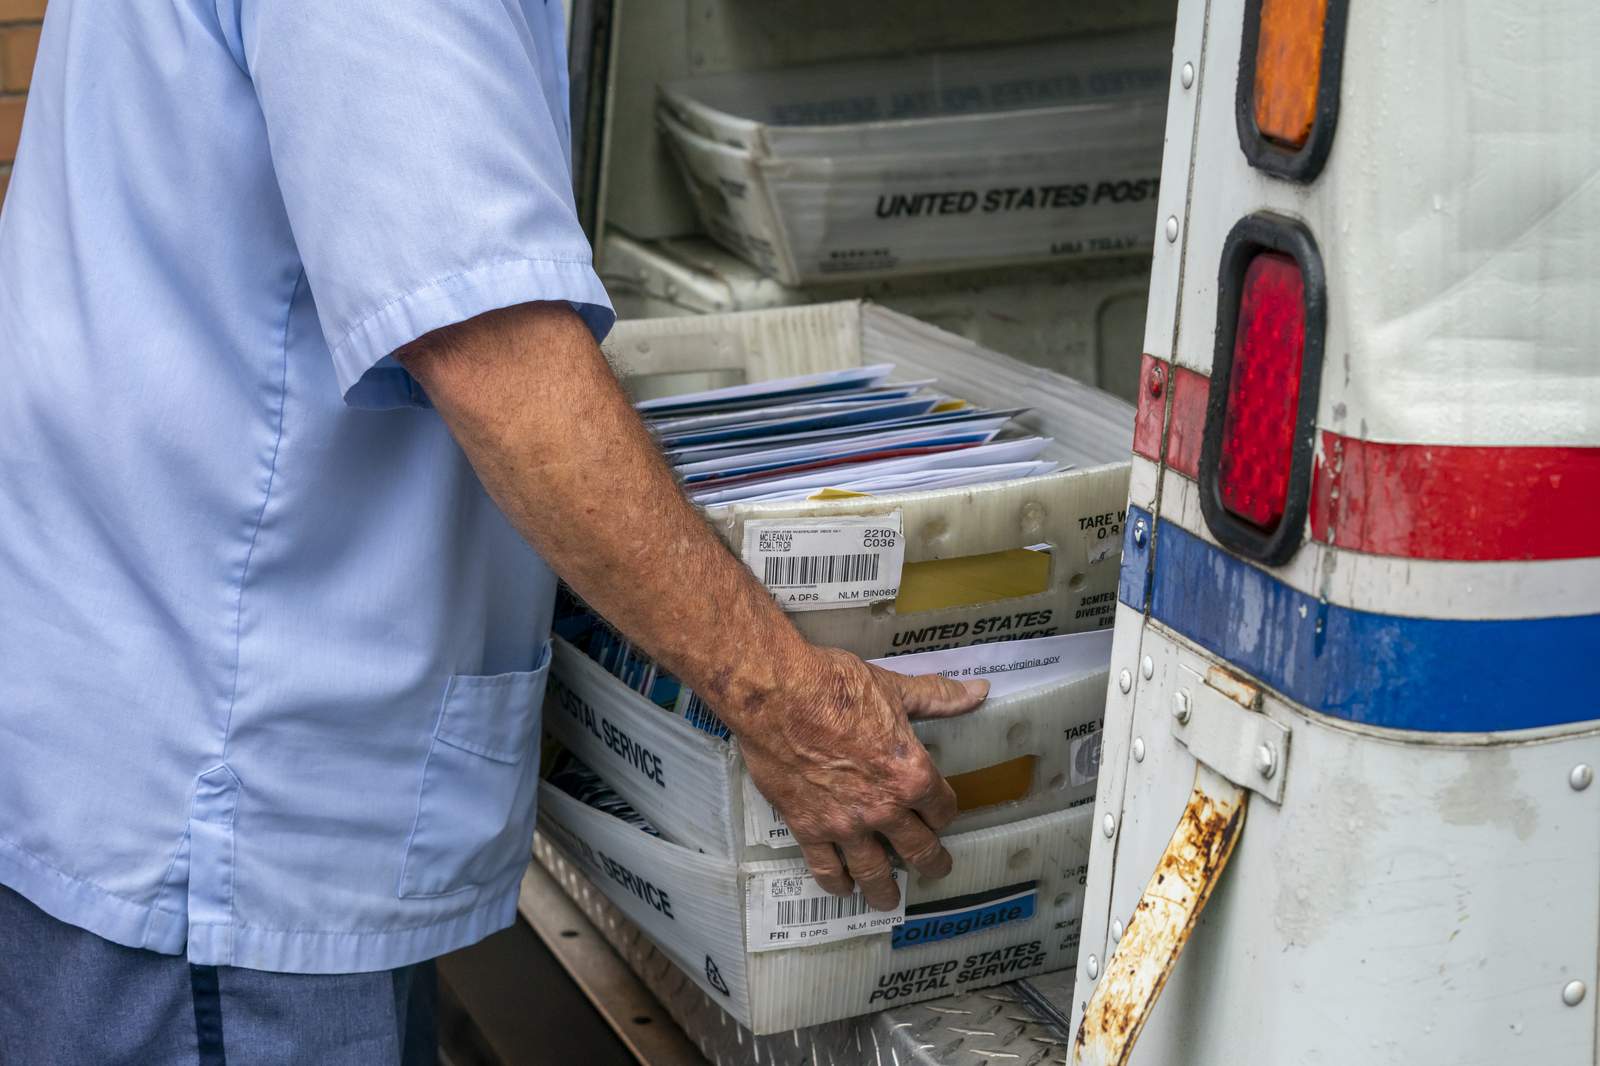 Detroit mail delivery slowest in nation, USPS data shows